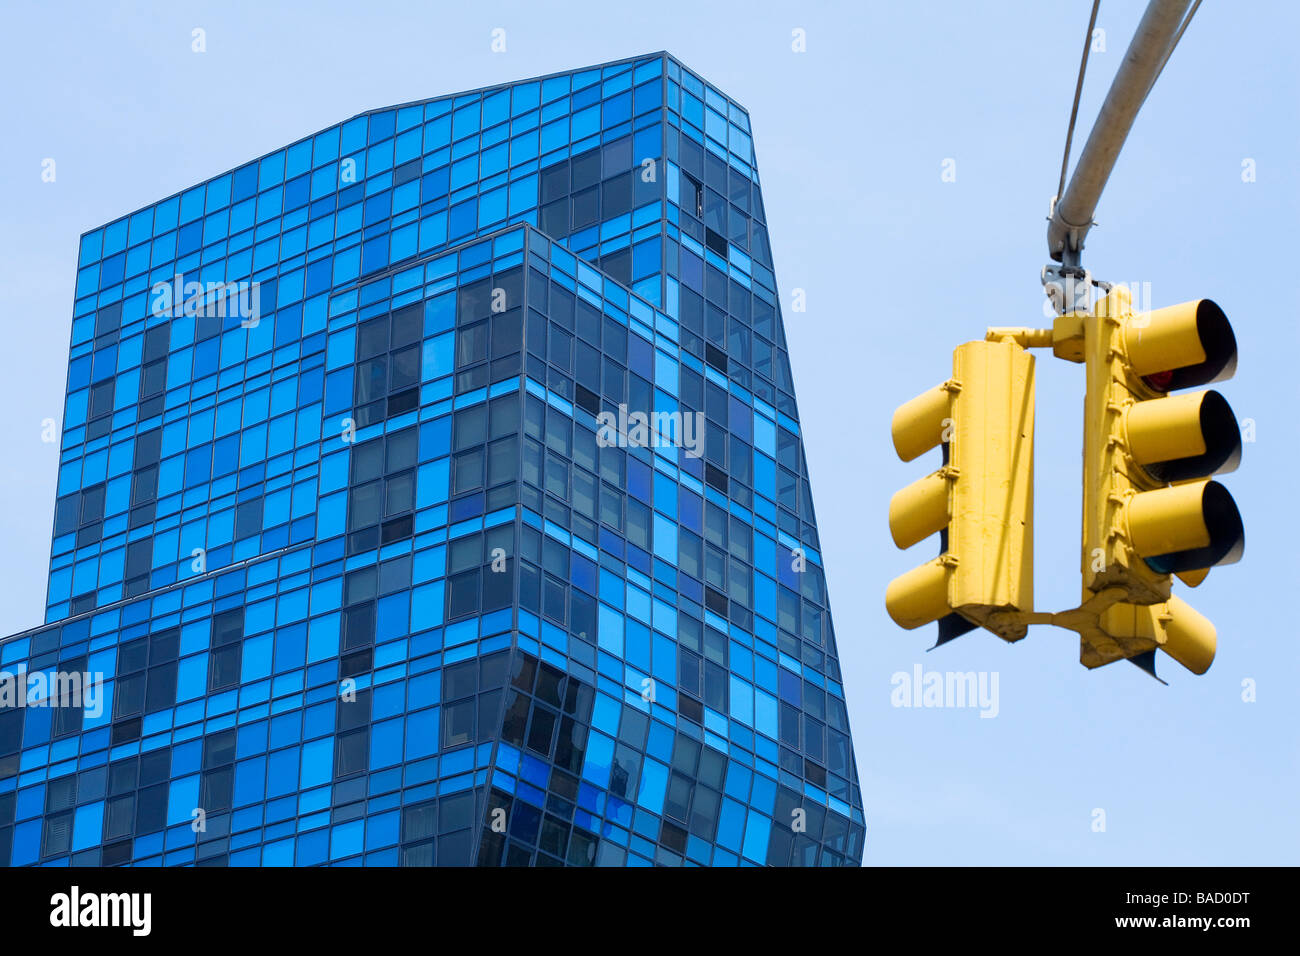 United States, New York city, Lower East Side, crossing of Delancey Street and Essex Street with the Blue Condominium building Stock Photo